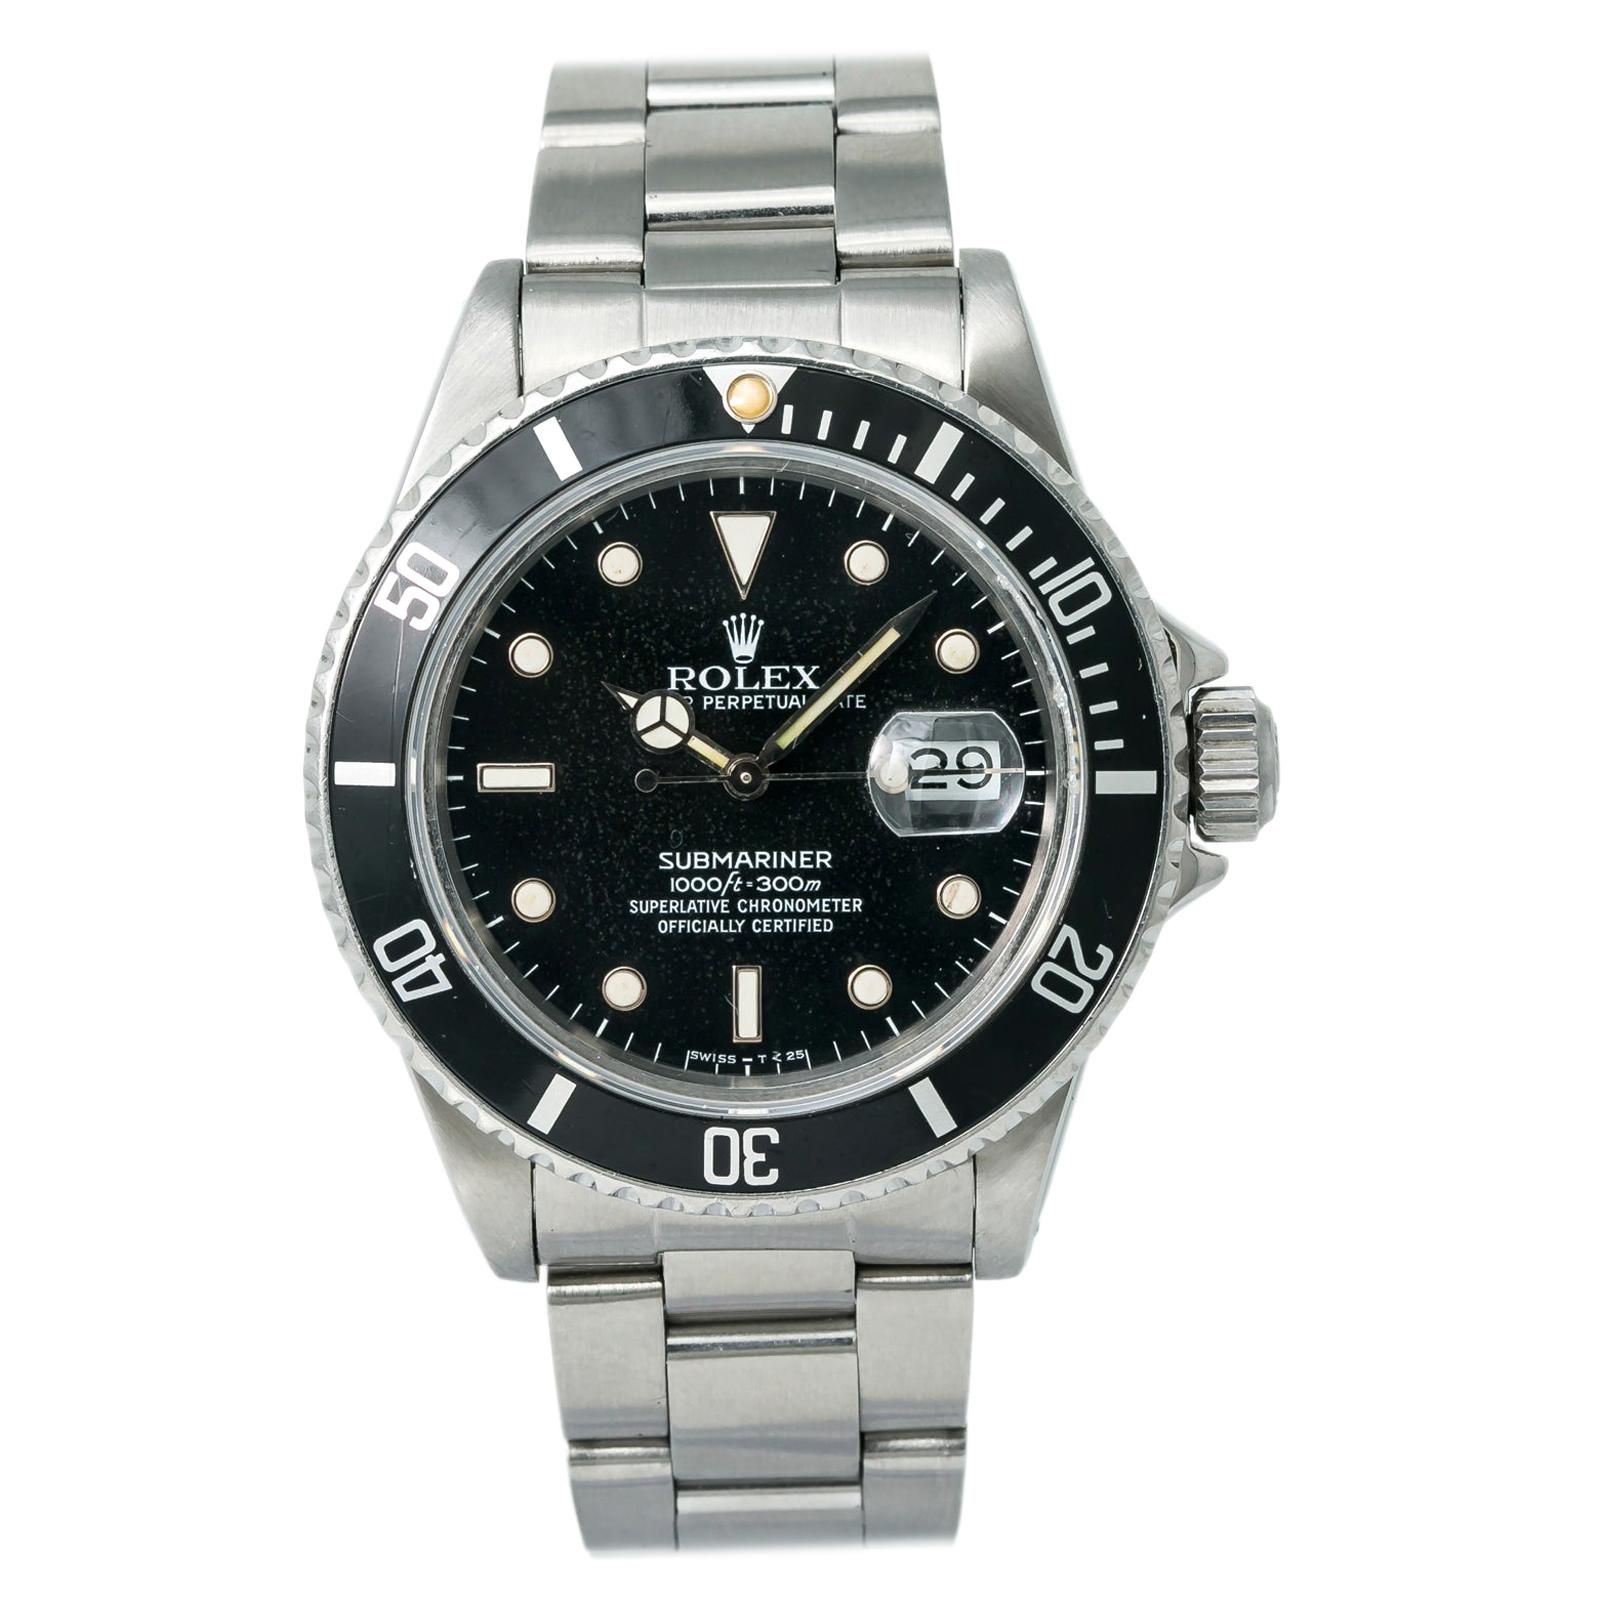 Rolex Submariner 16800 Men's Automatic Watch Stainless Steel Black Dial For Sale